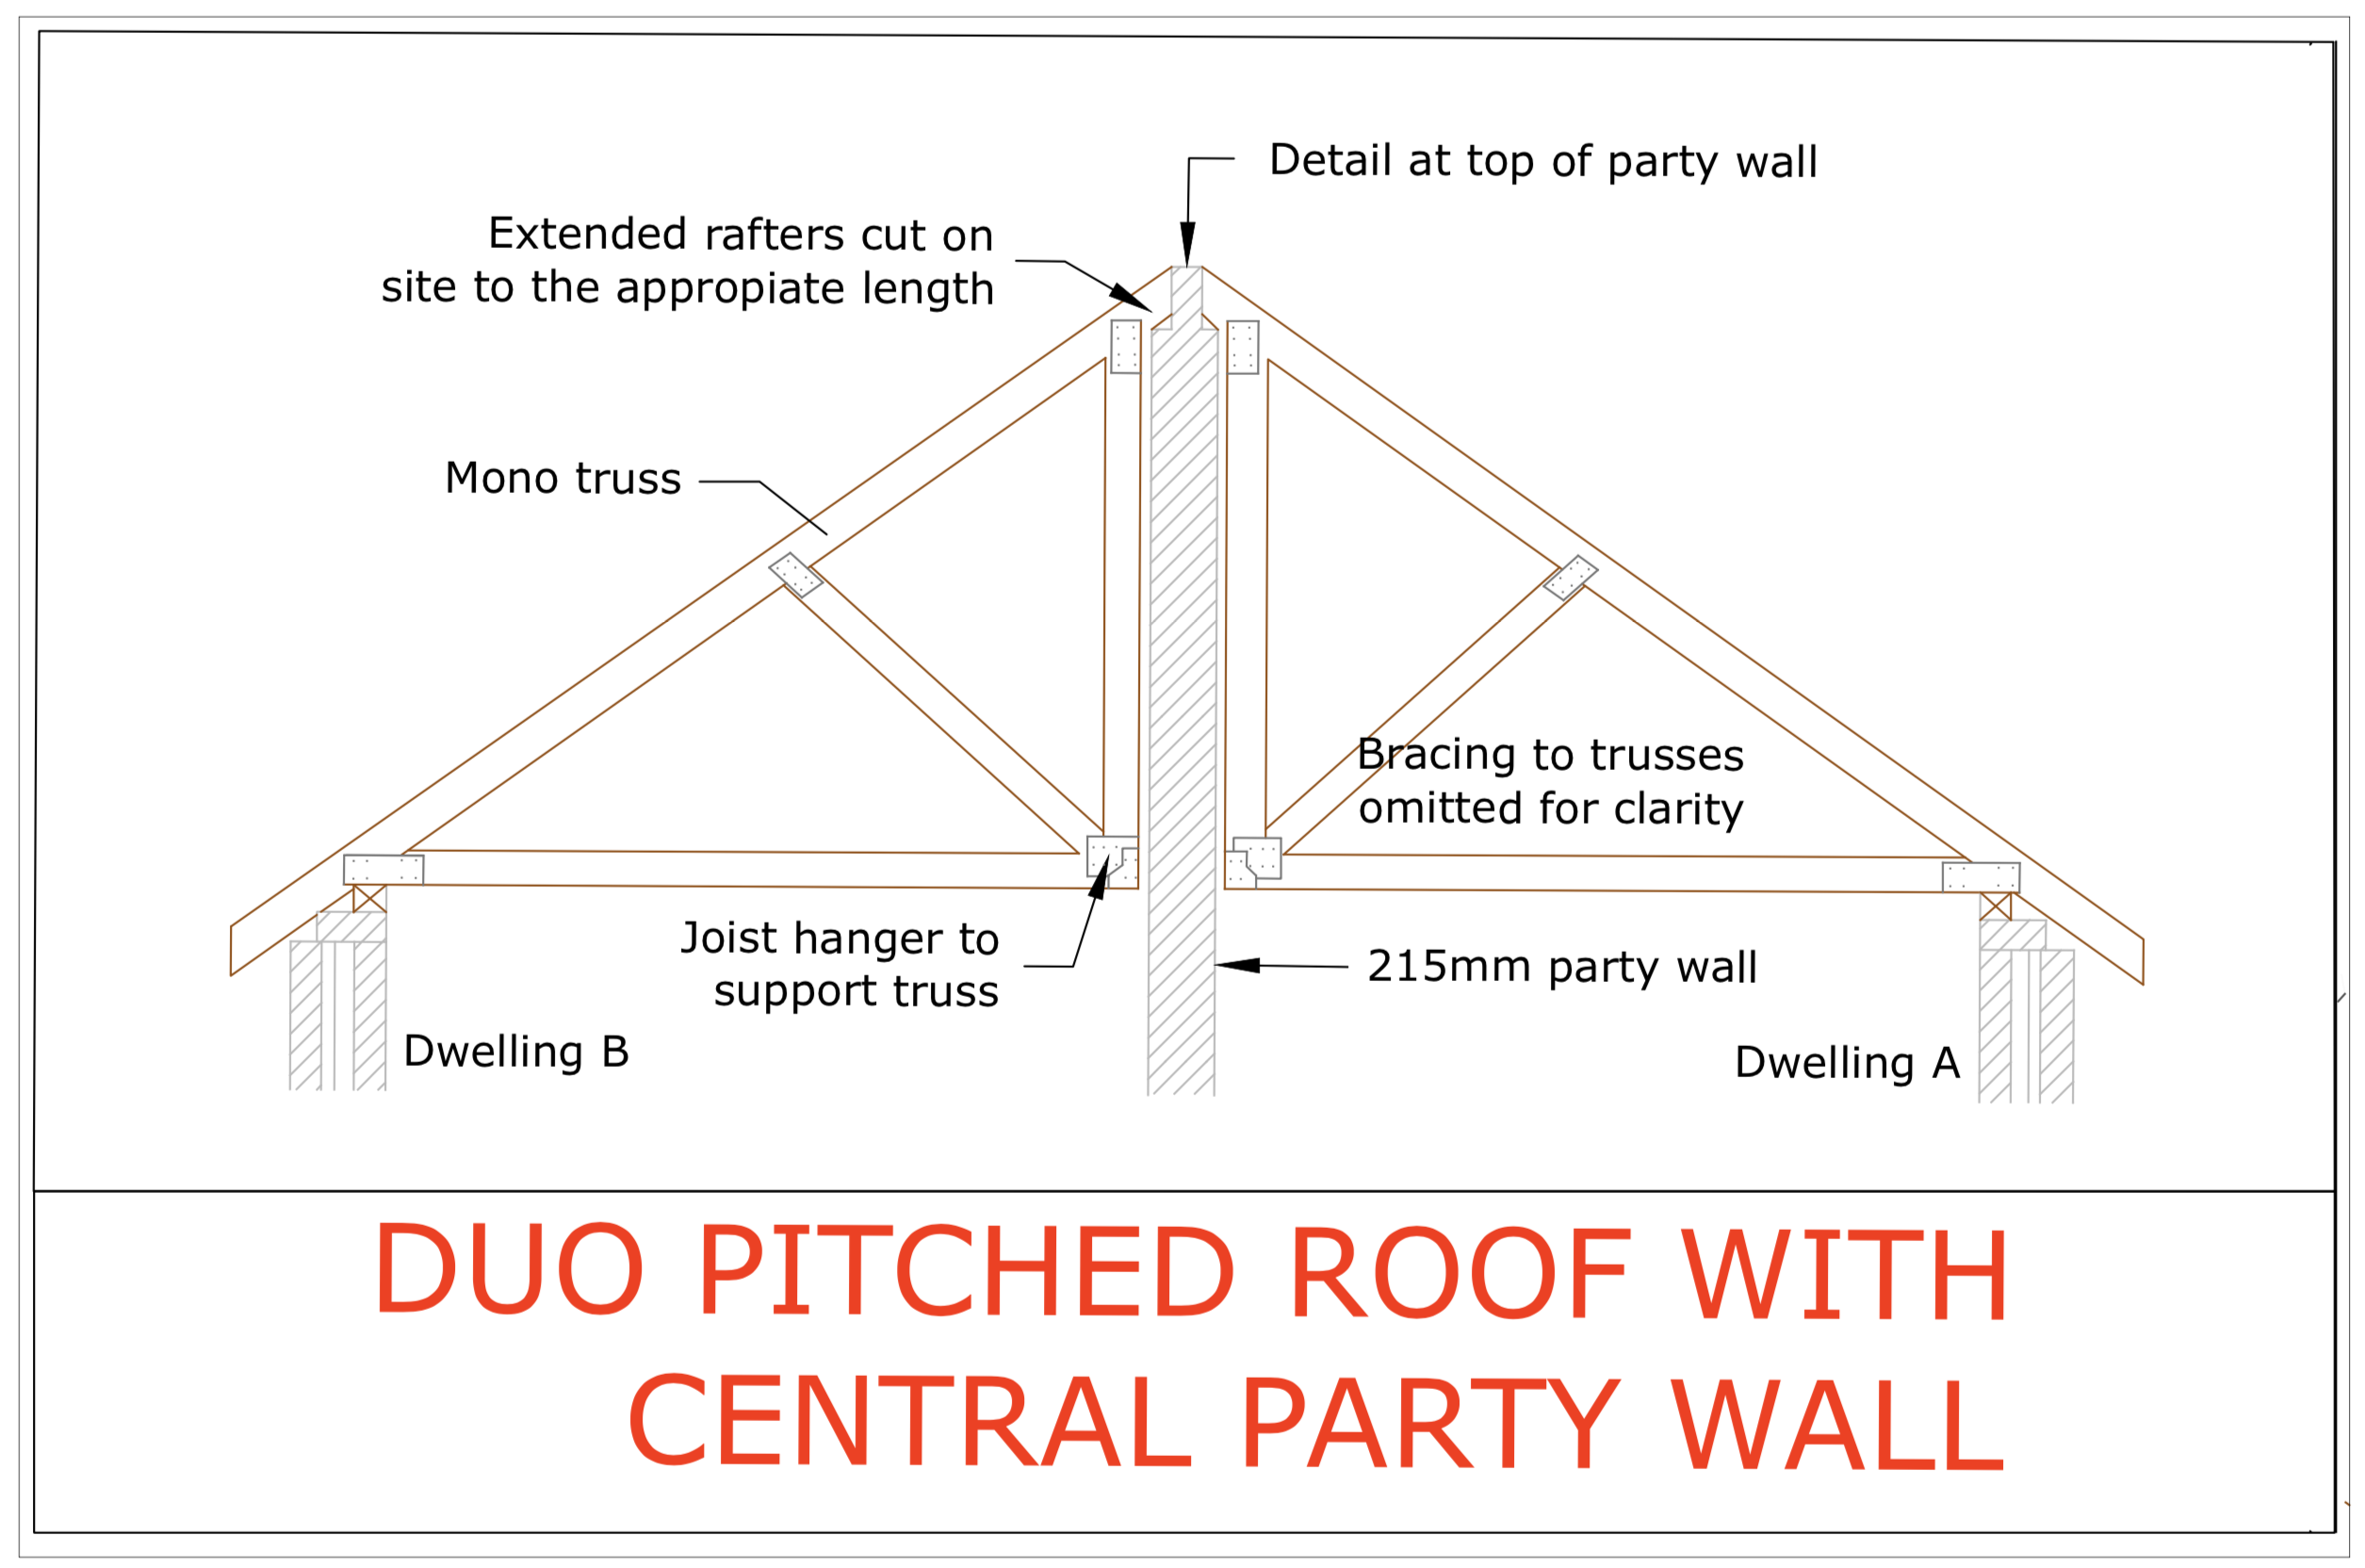 Diagram D60 - Duo pitched roof with party wall